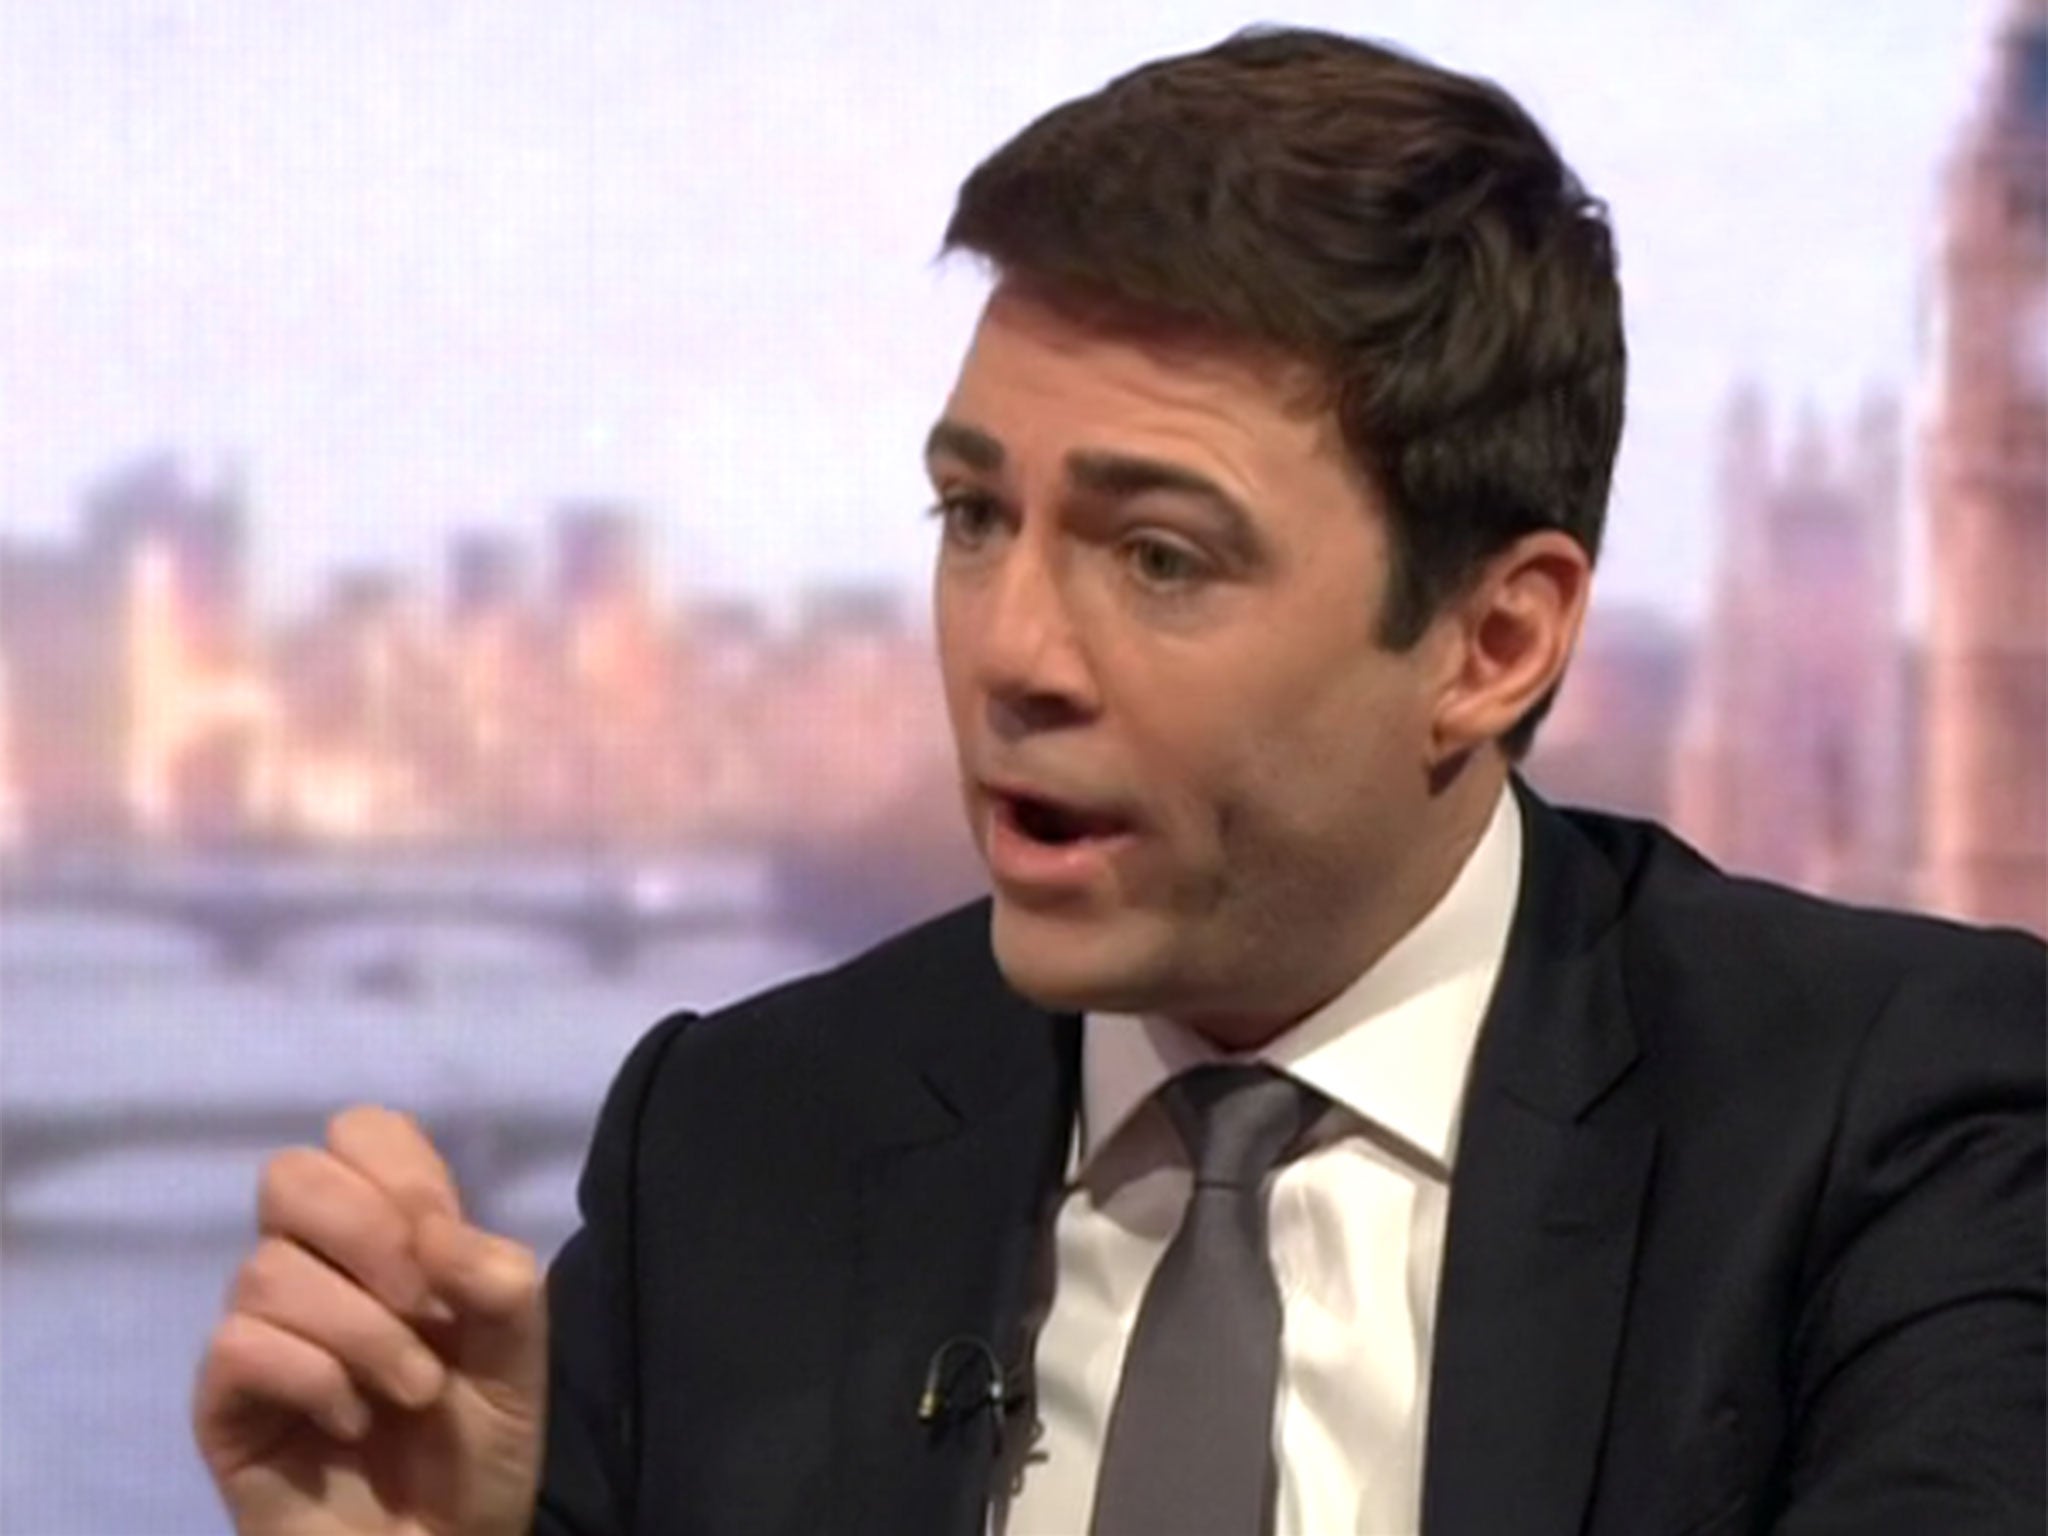 Labour leadership candidate Andy Burnham calls for an EU referendum to be brought forward on the Andrew Marr Show, 17 May